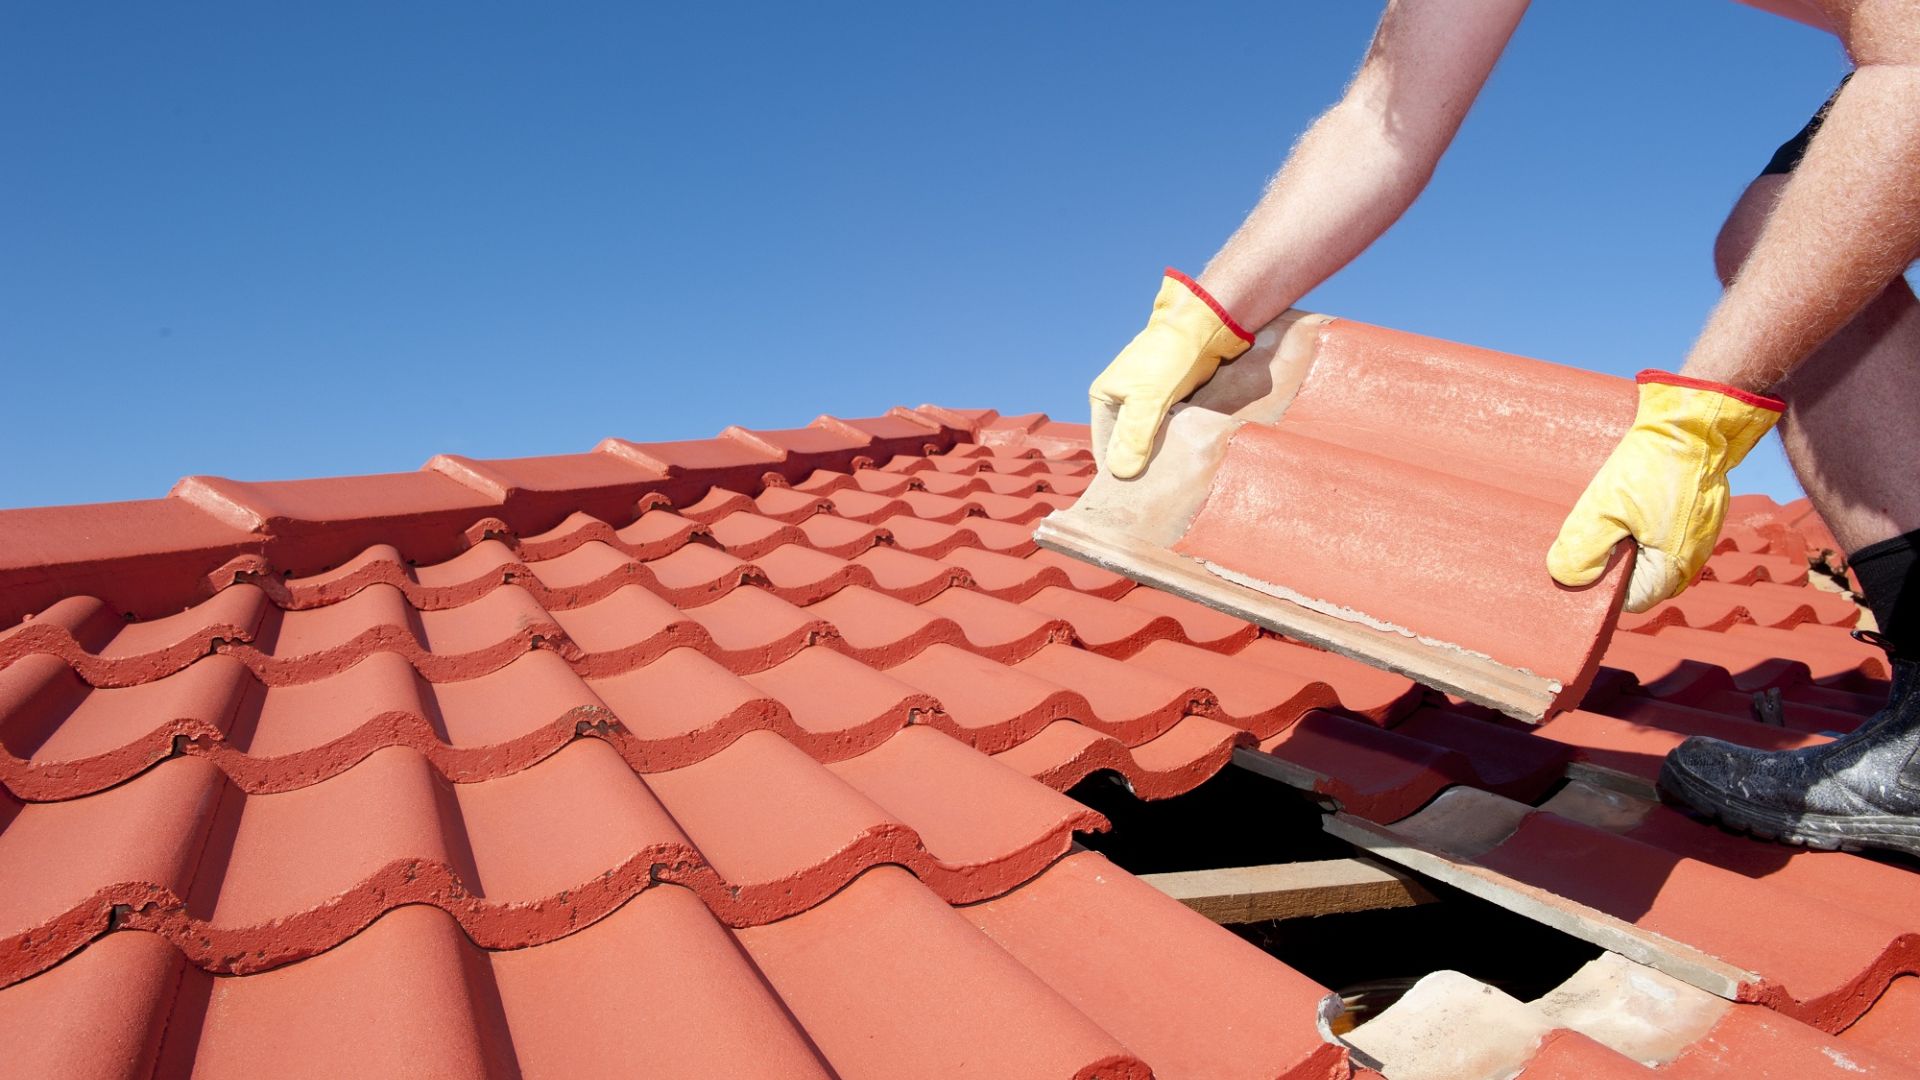 Why Choose Artfix Clay Tile Roofing Services for Your Unique Vision?